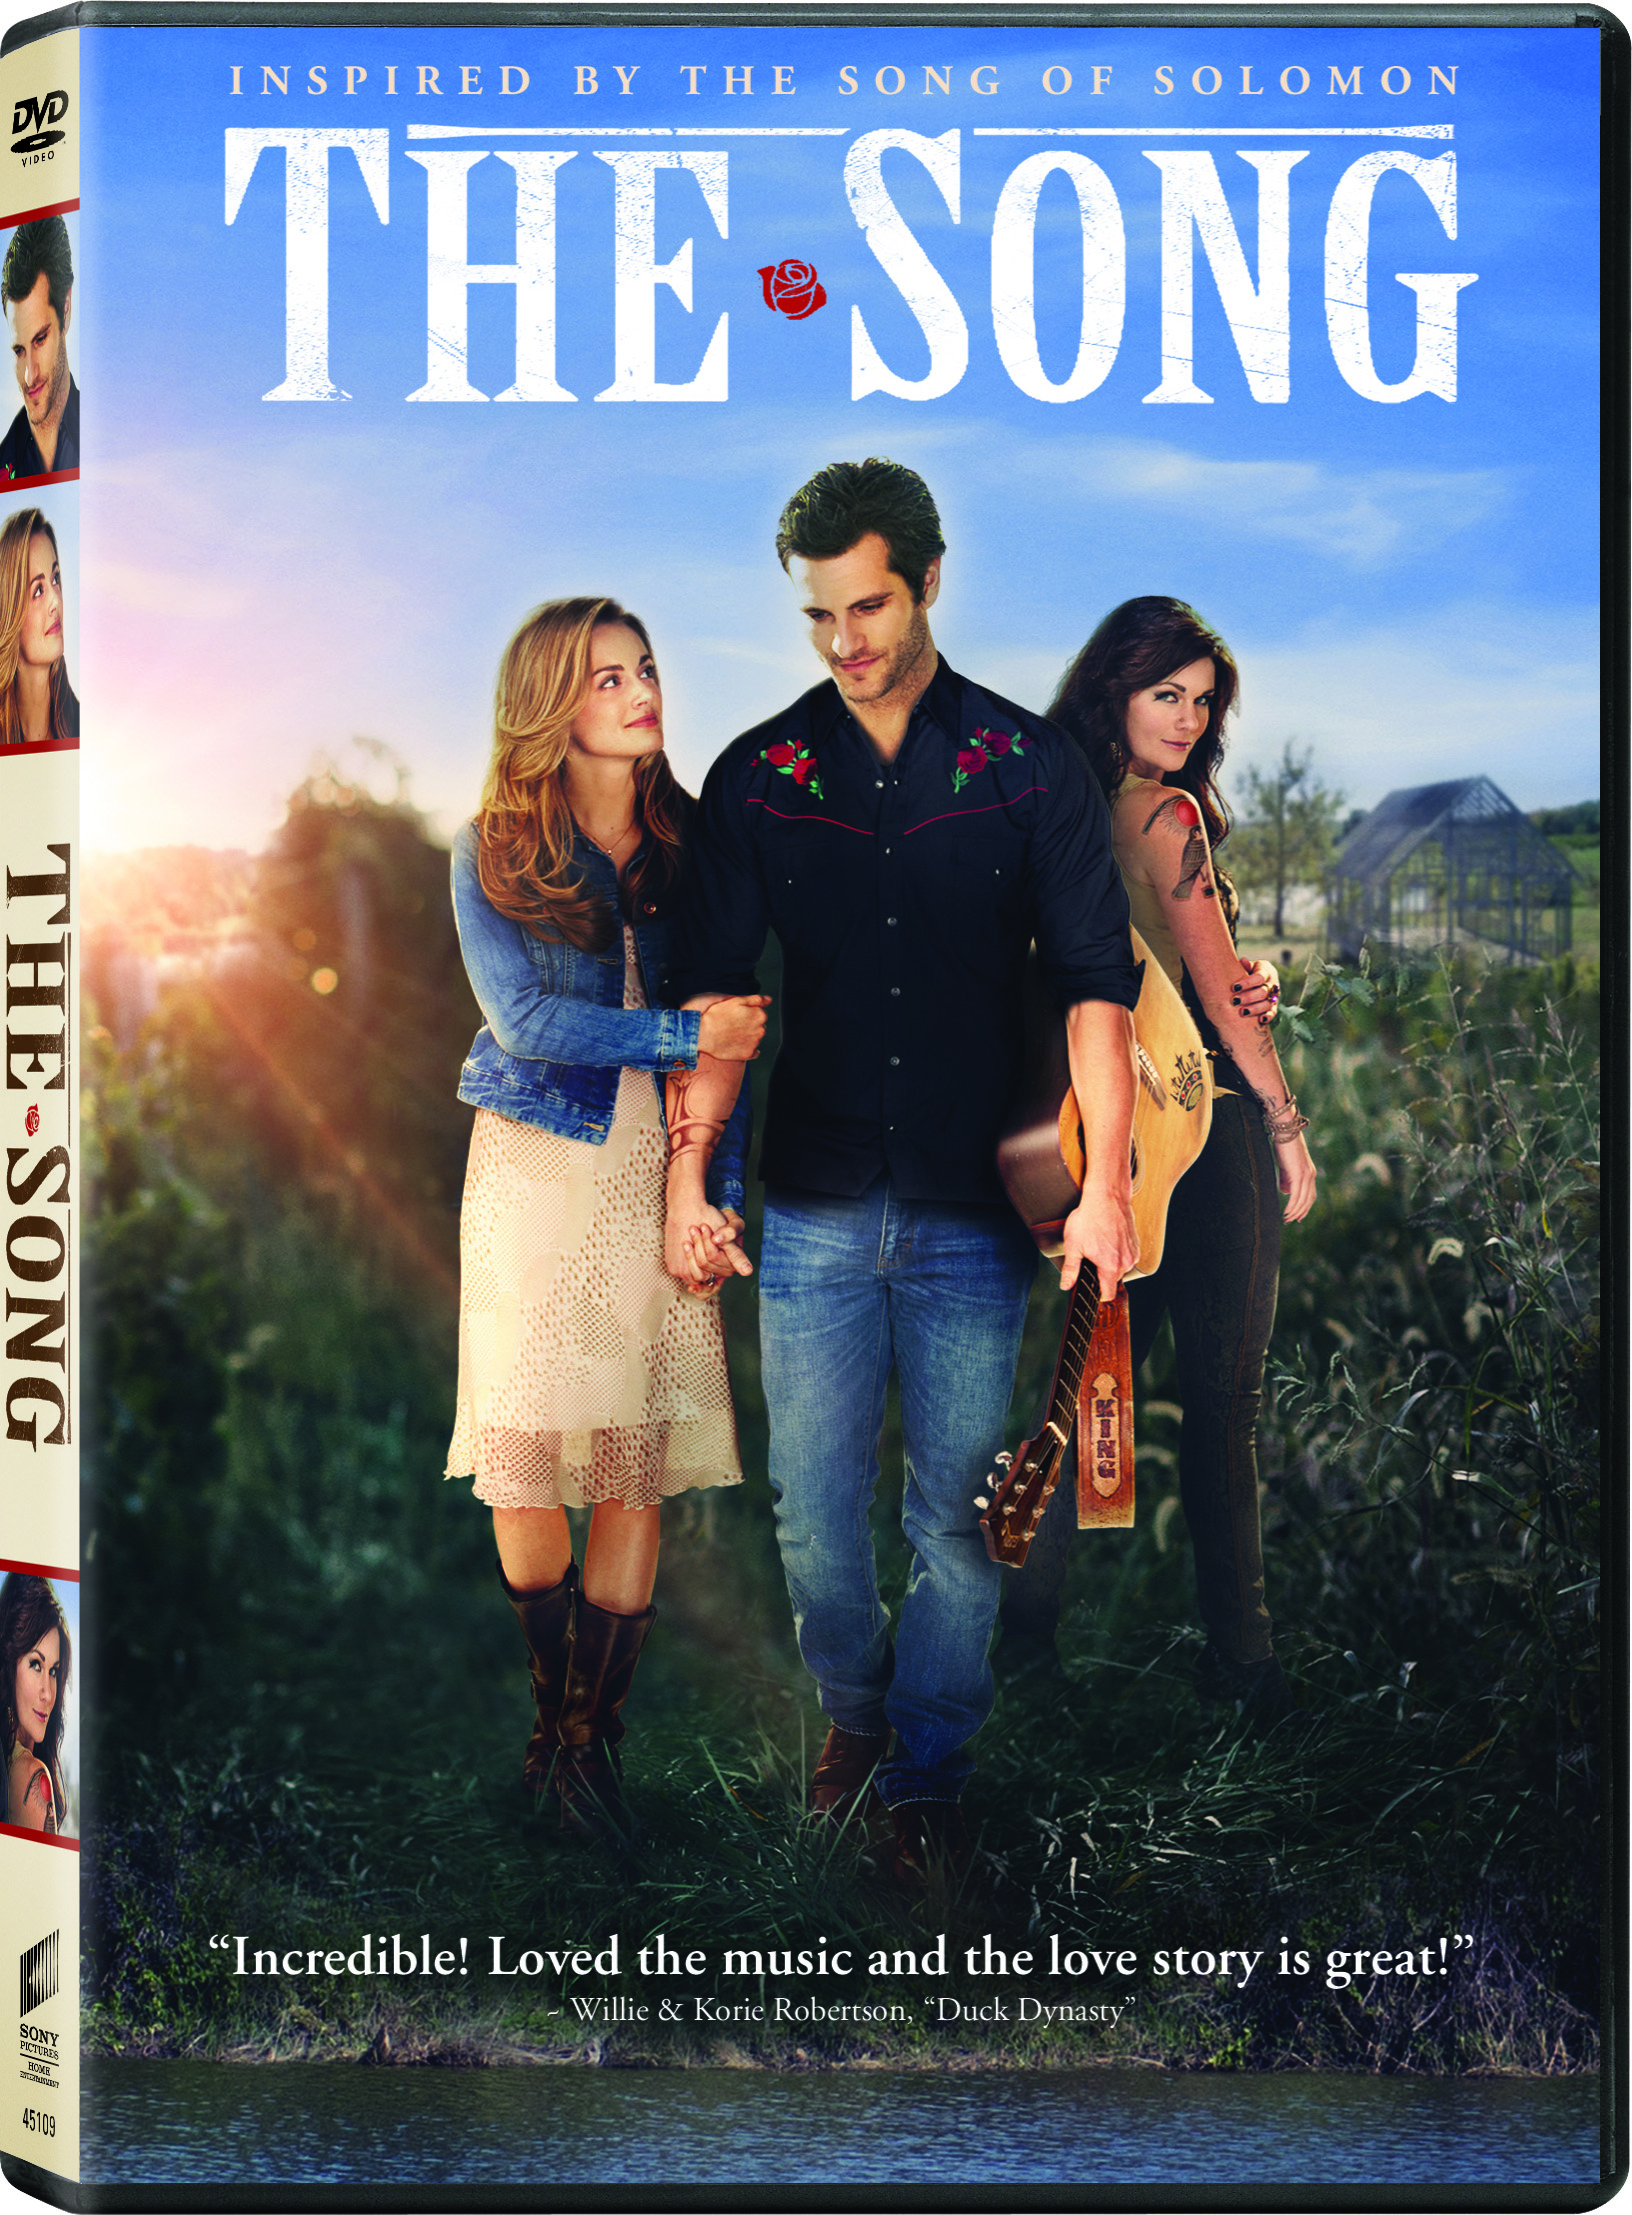 The Song DVD Review